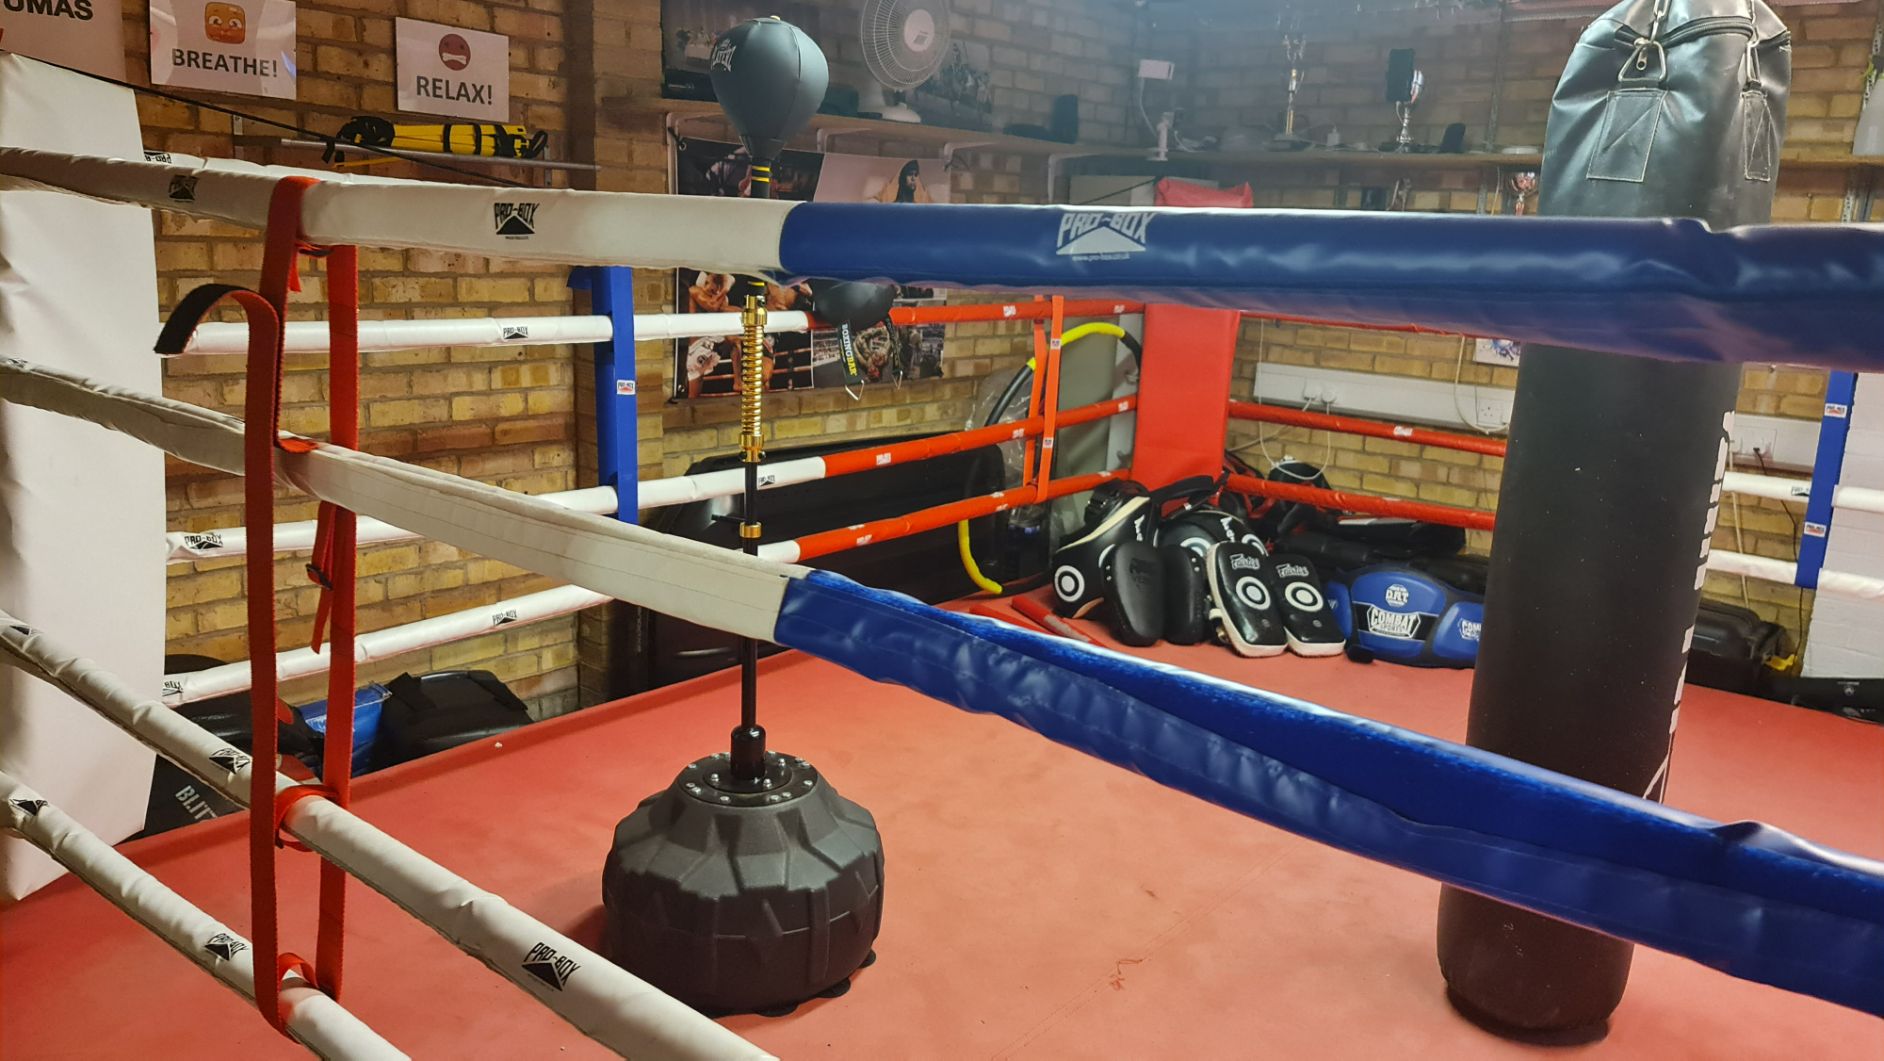 Some of the tools for use within the ring itself.